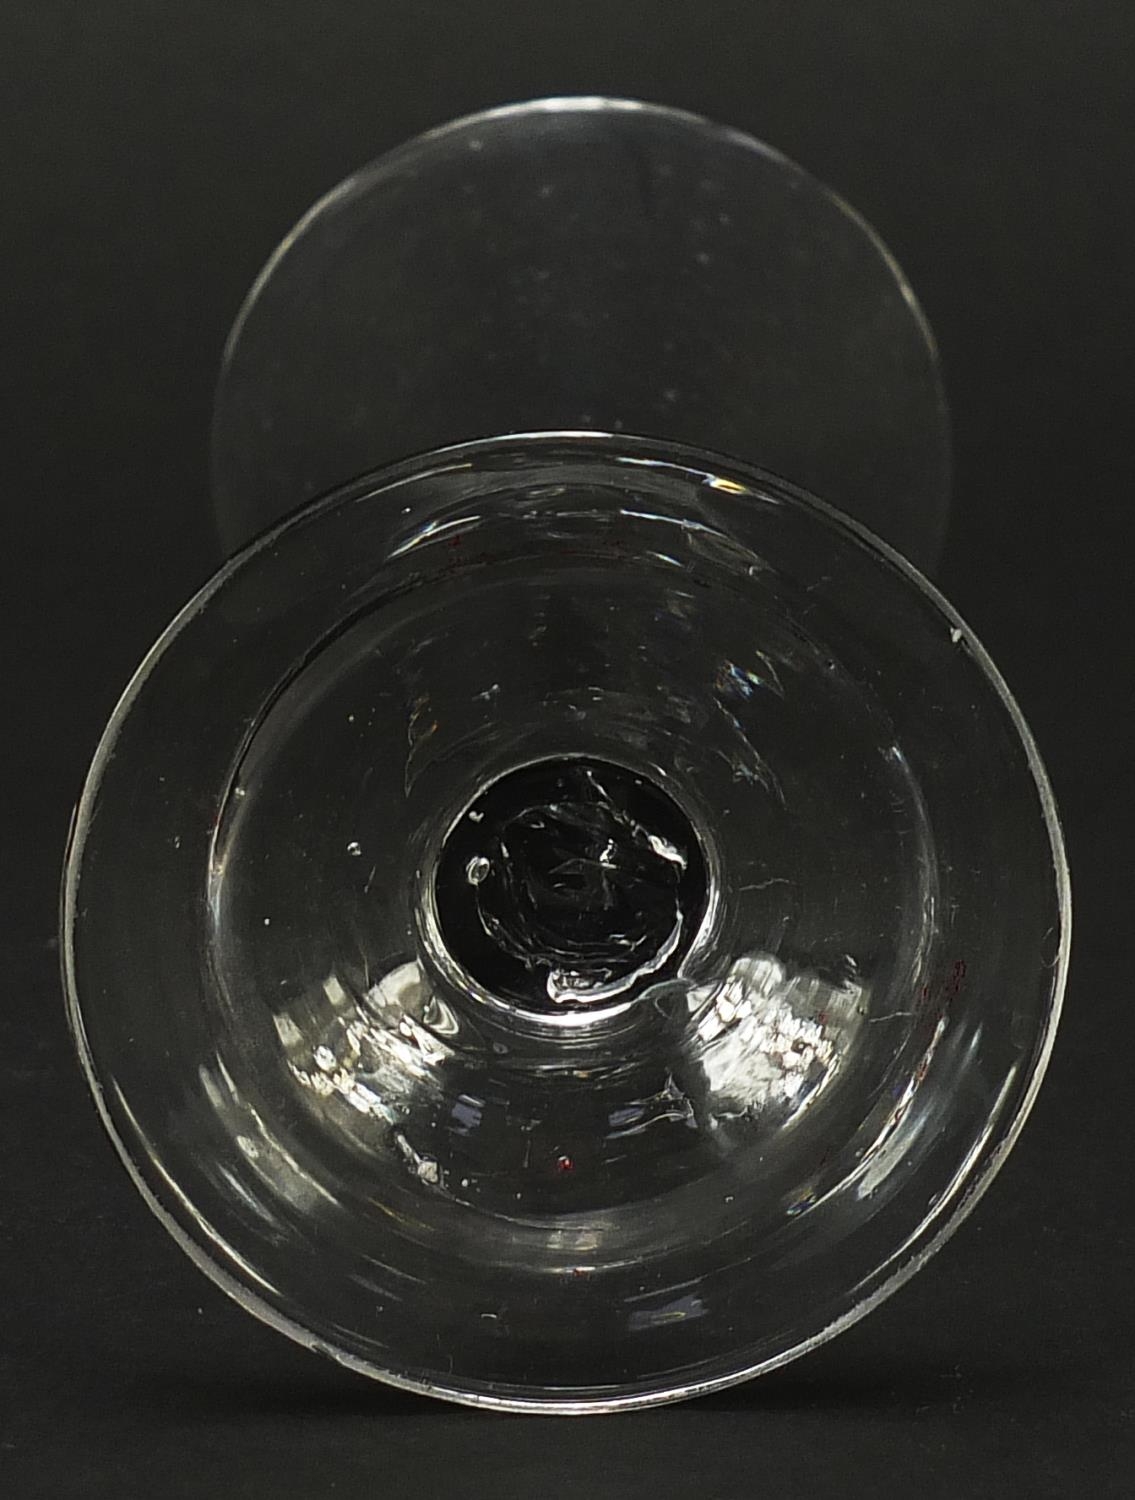 18th century wine glass with enclosed tear bubbles, 16.5cm high - Image 3 of 3